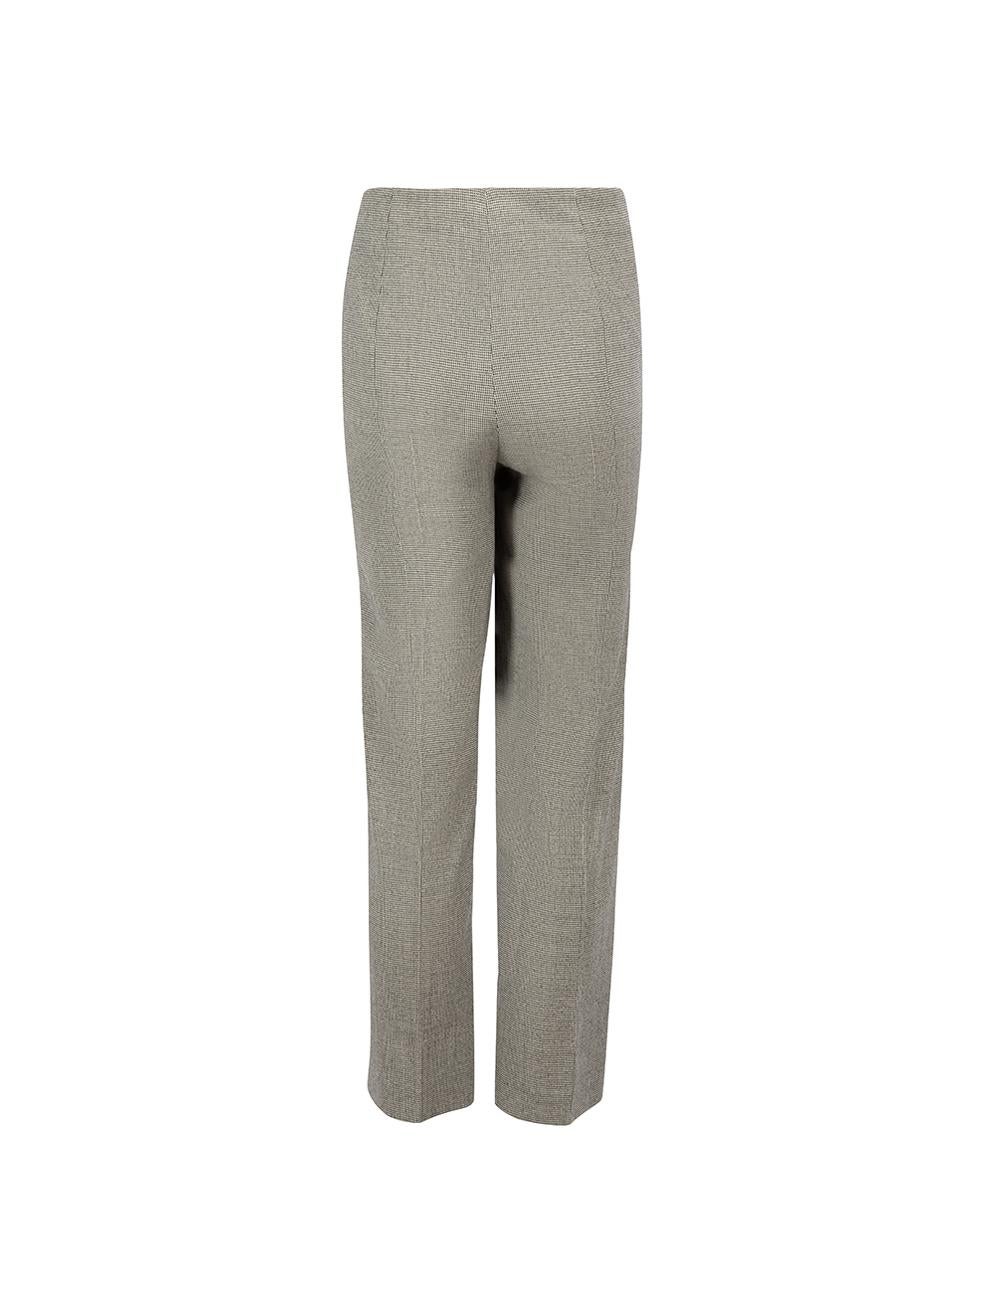 Grey Houndstooth Tailored Trousers Size XL In Good Condition For Sale In London, GB